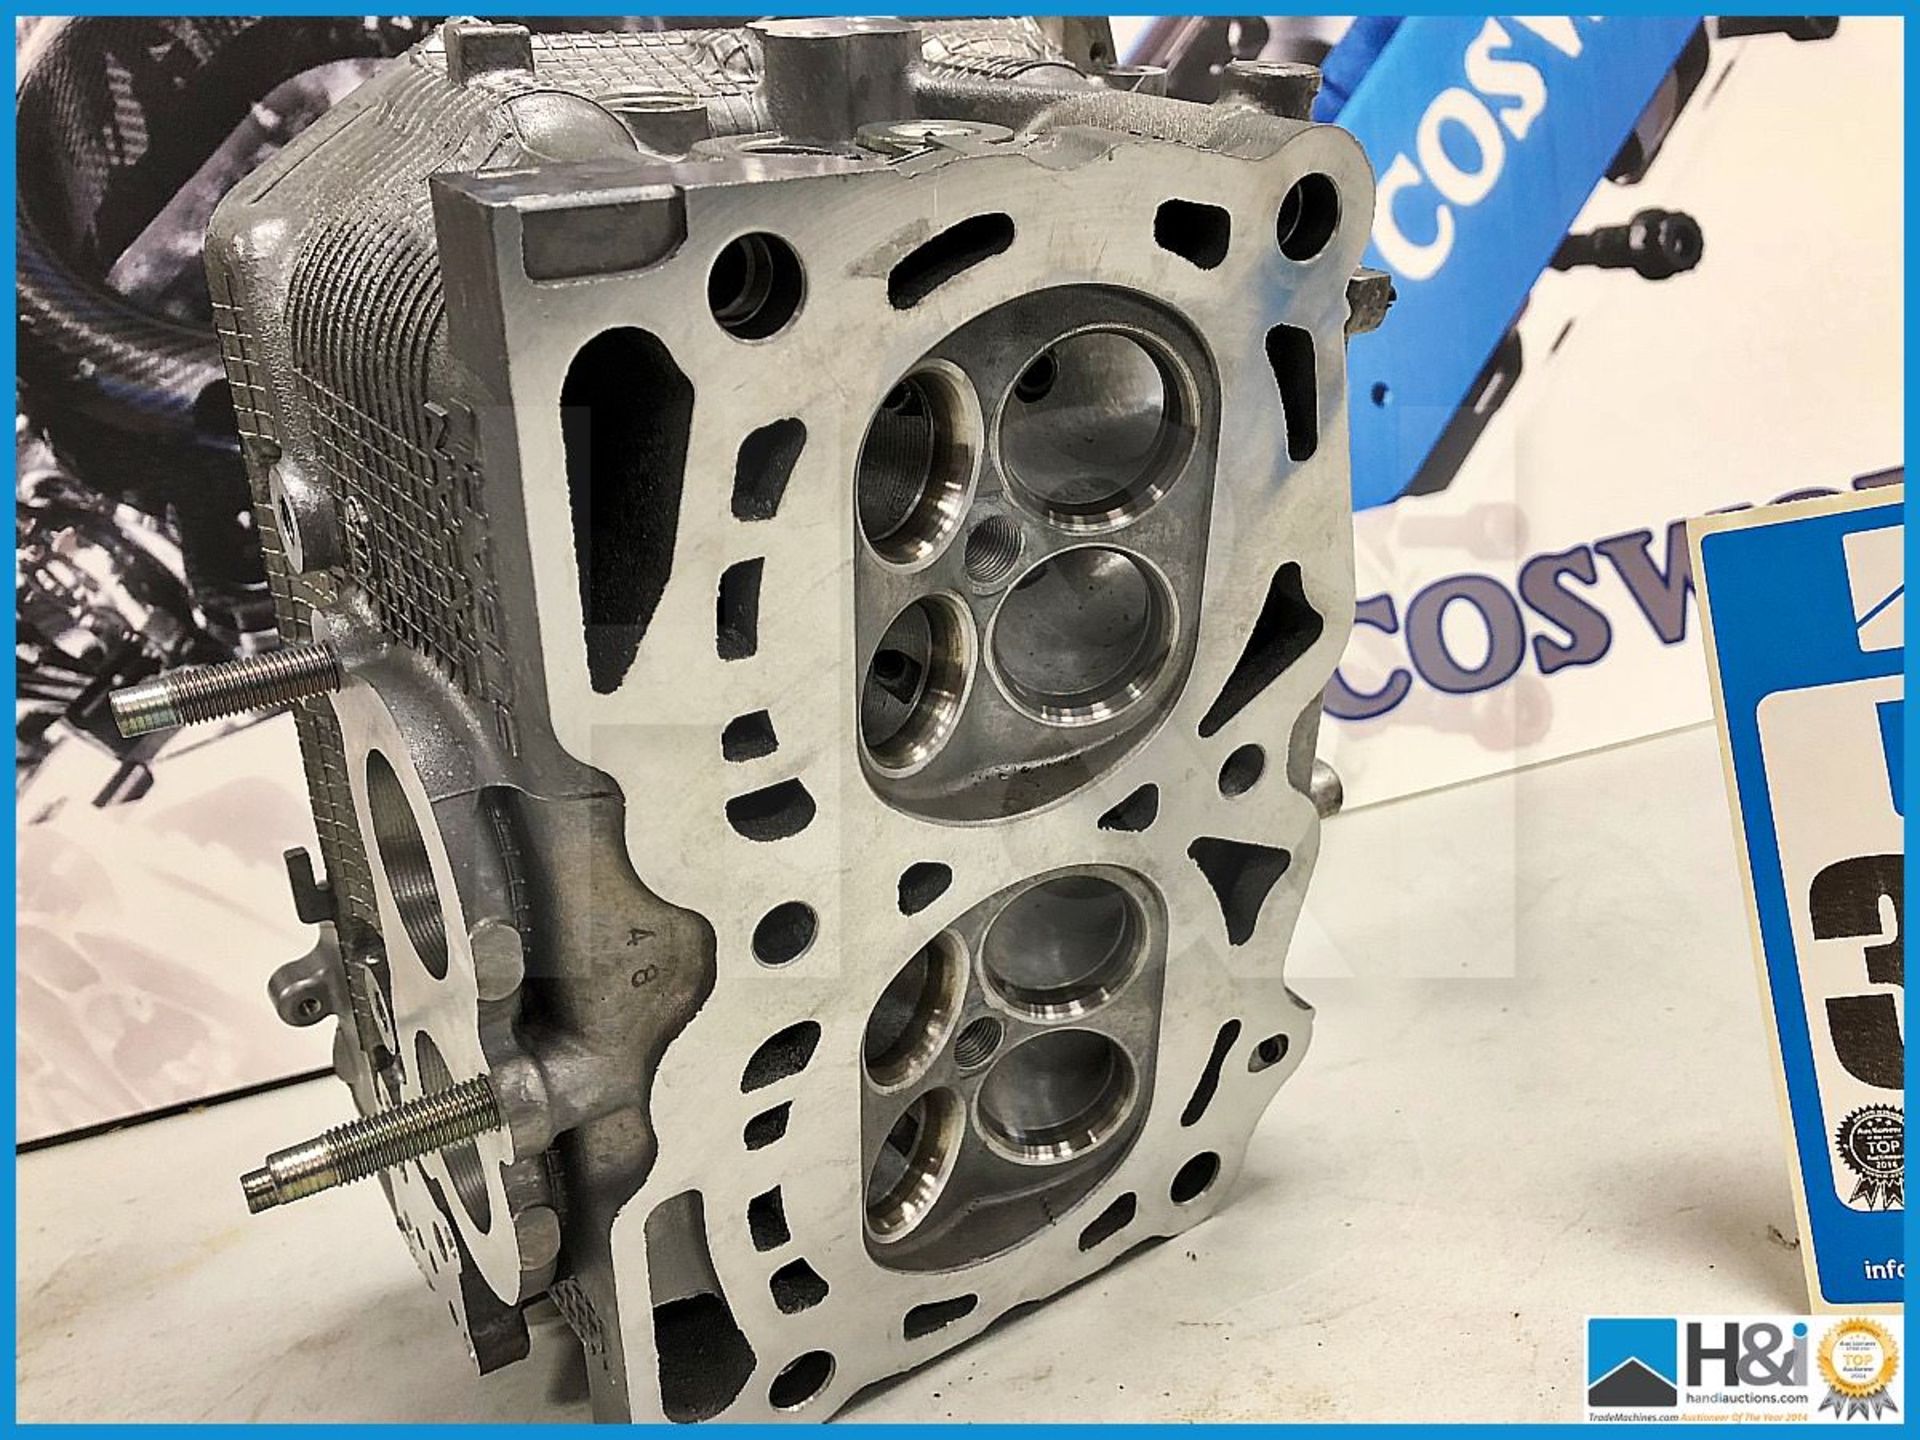 1 x Cosworth cylinder head LH ported. 08 STI EJ25. Code: 20004543. Lot 106. RRP GBP 800 - Image 2 of 3